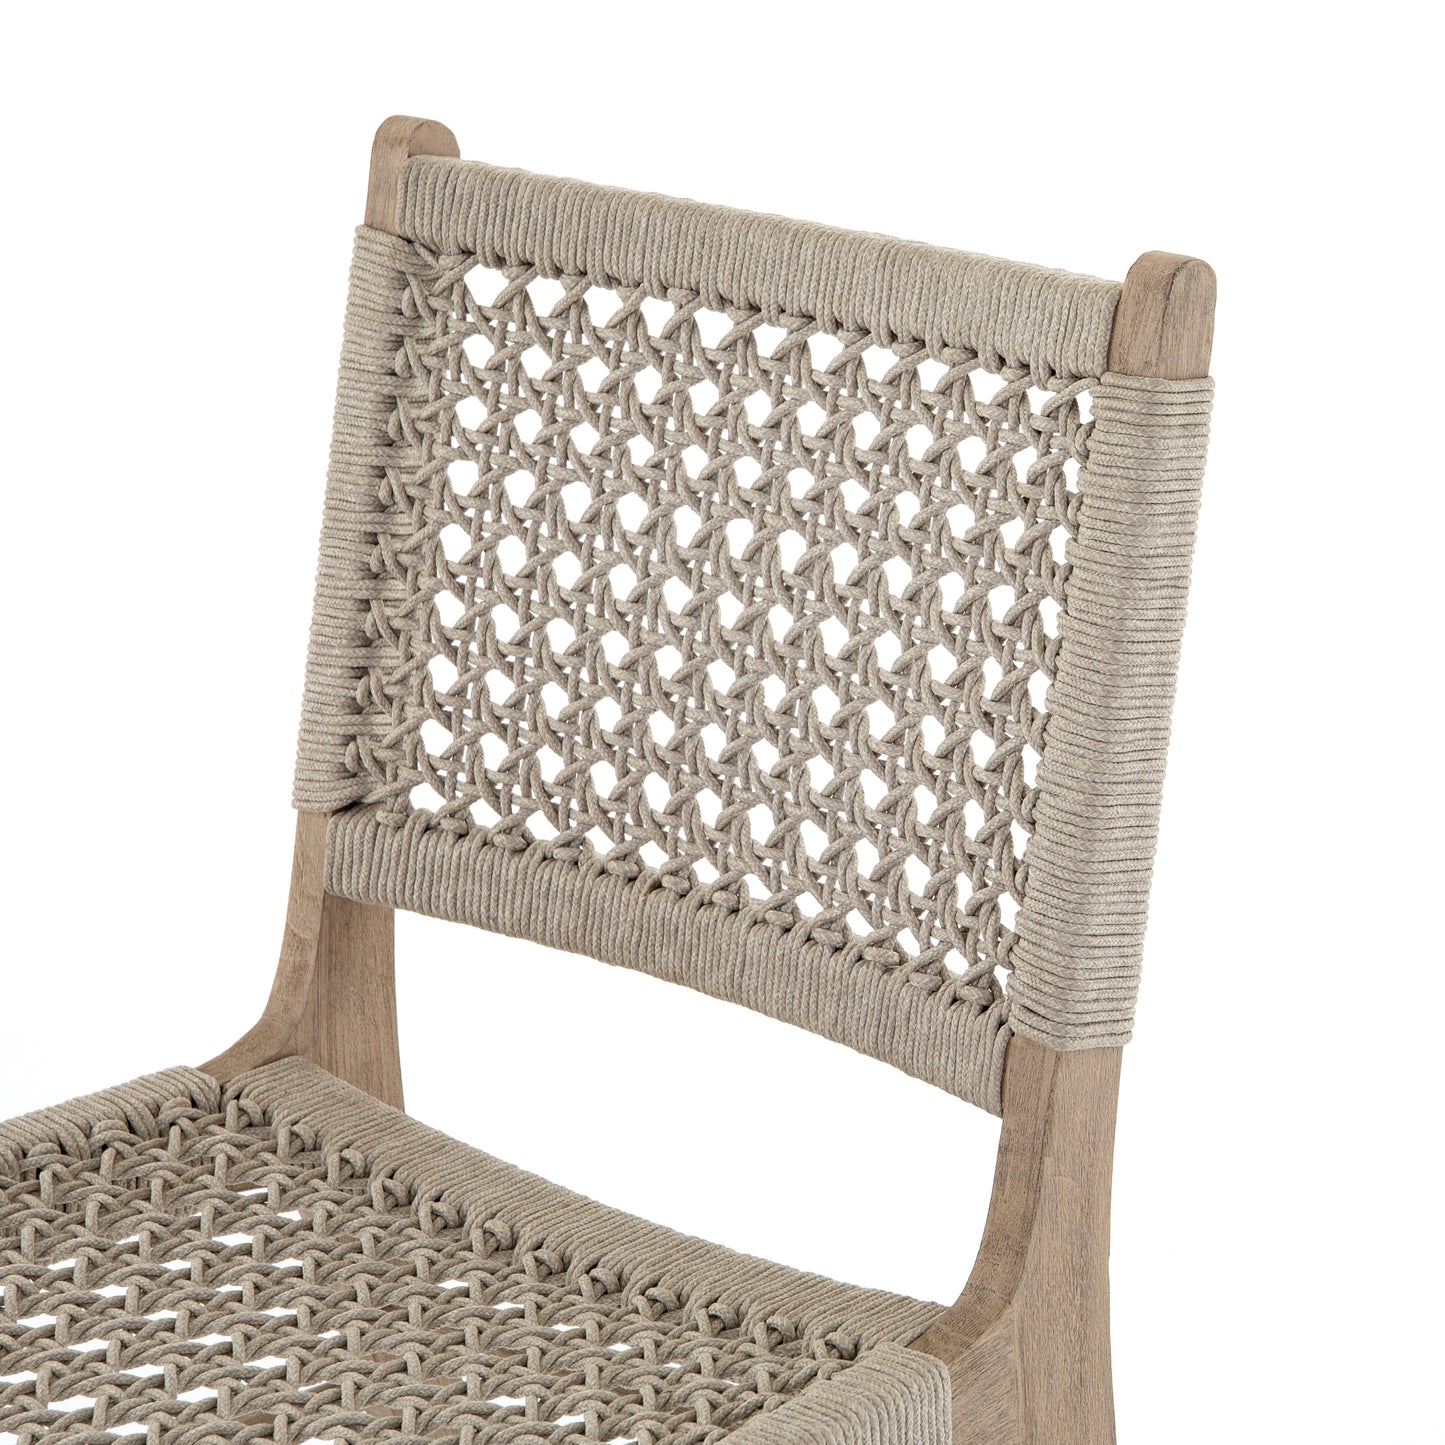 Delmar Outdoor Dining Chair Outdoor Chairs Four Hands     Four Hands, Mid Century Modern Furniture, Old Bones Furniture Company, Old Bones Co, Modern Mid Century, Designer Furniture, https://www.oldbonesco.com/